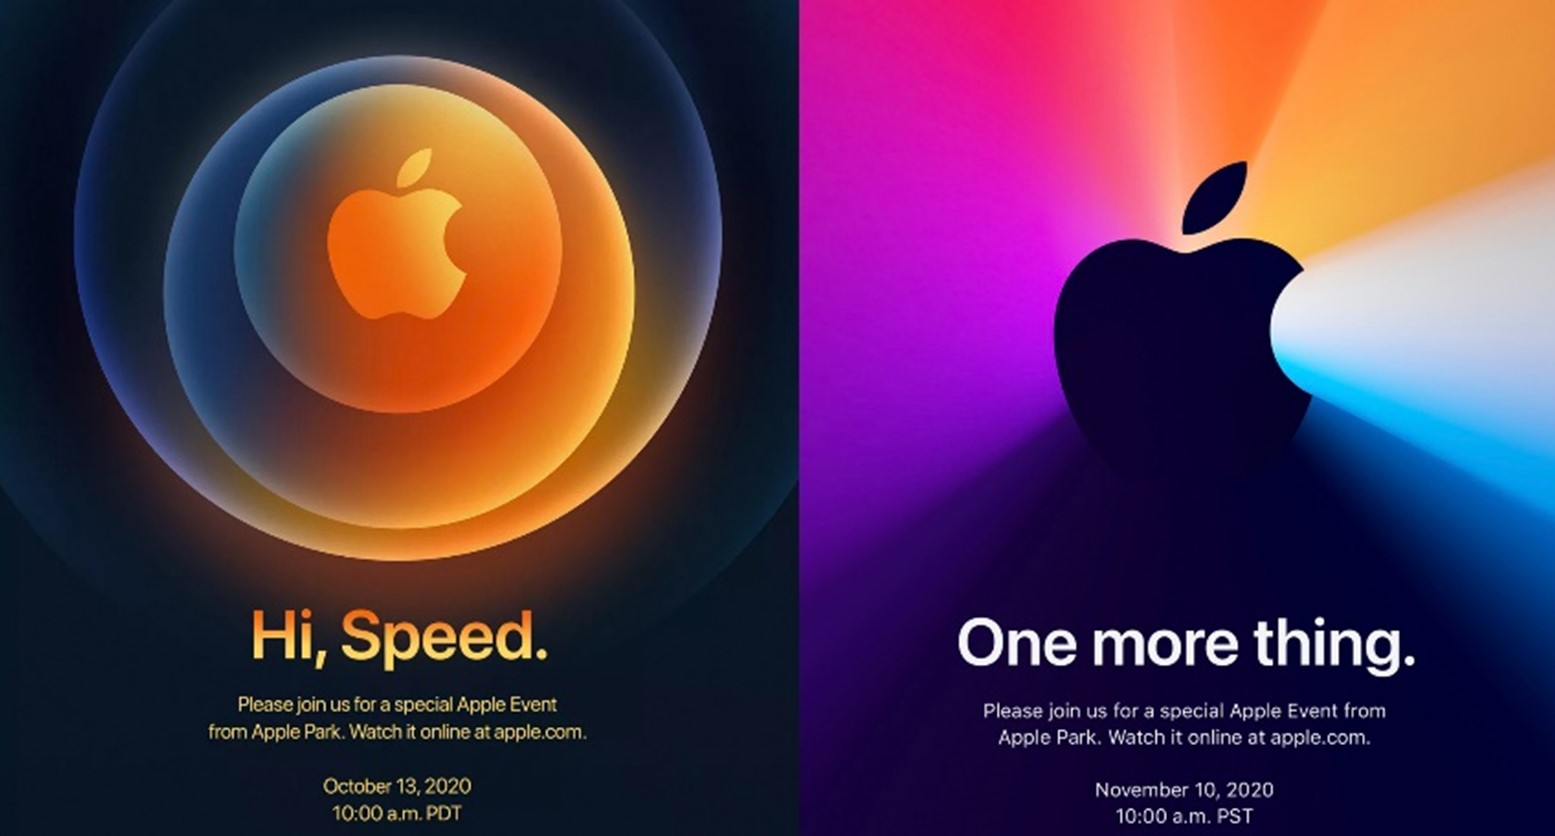 Apple Event Announcement posters